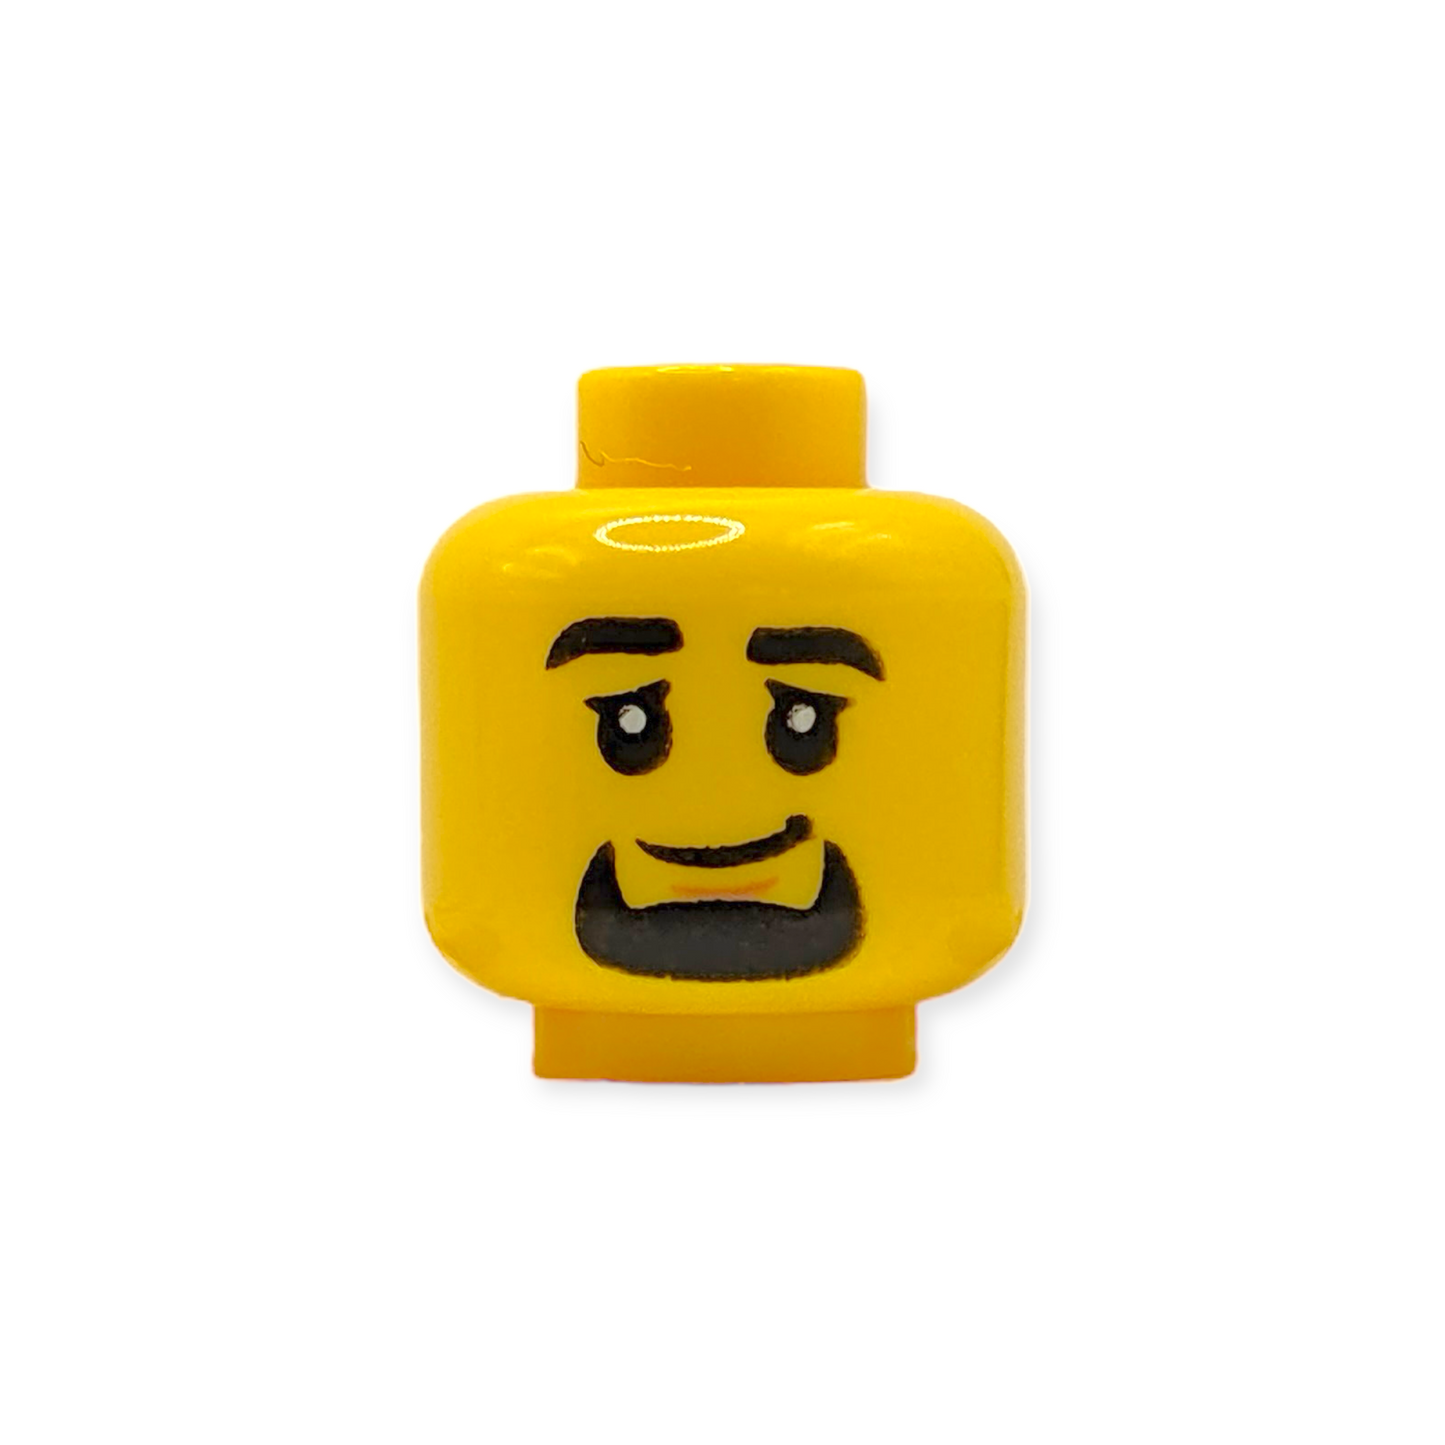 LEGO Head - 3926 Black Eyebrows and Goatee, Chin Dimple